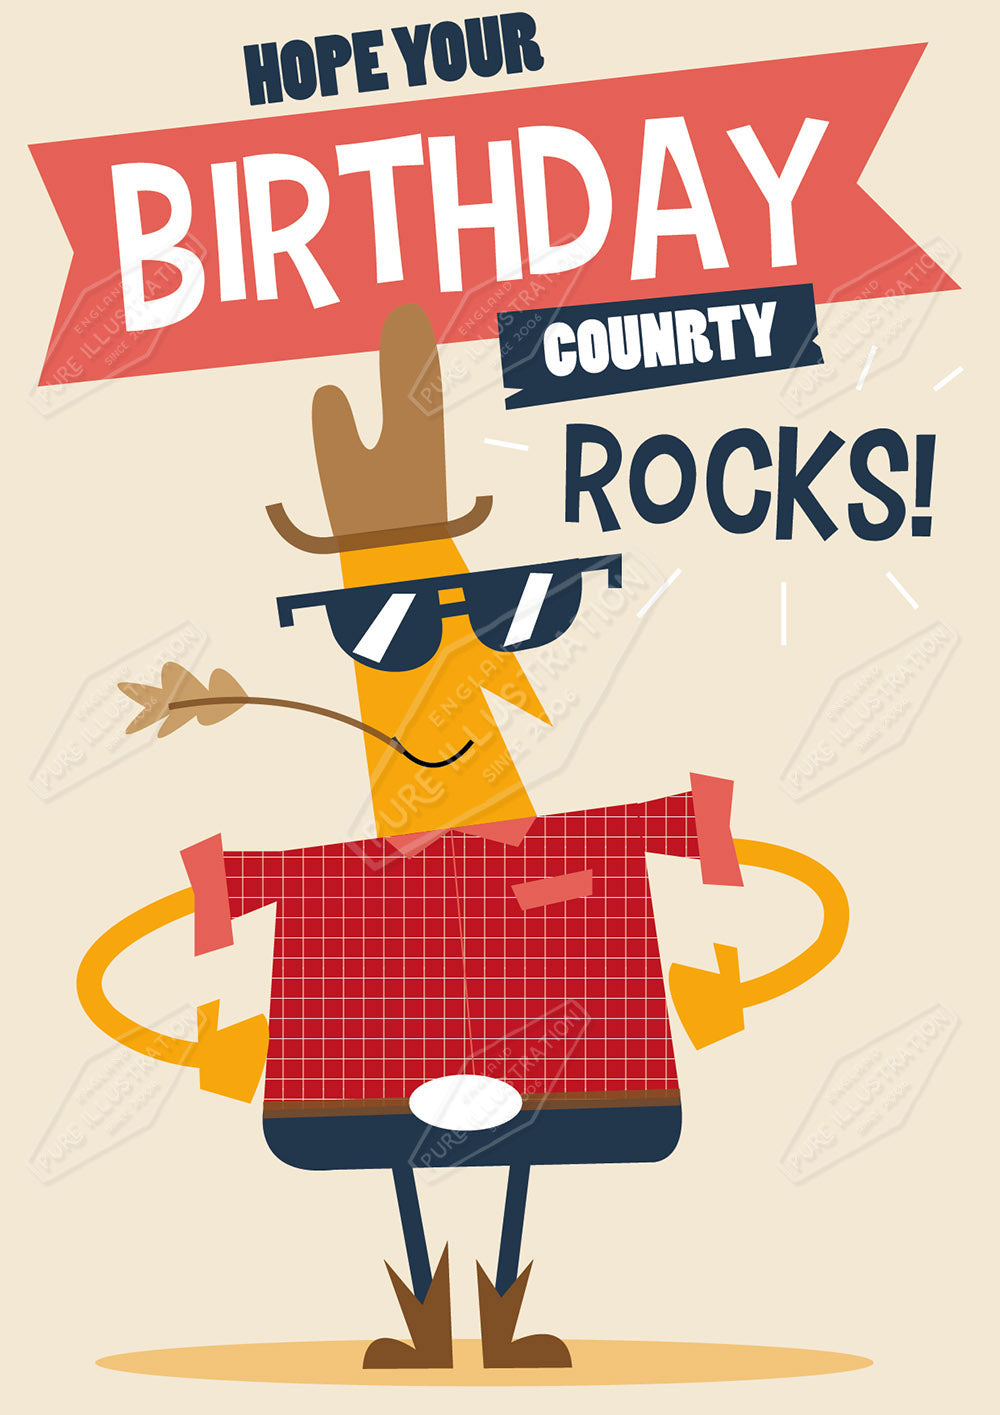 Dad You Rock Country Music Birthday / Father's Day Design for Greeting Cards - by Luke Swinney - Pure Art Licensing Agency & Surface Design Studio